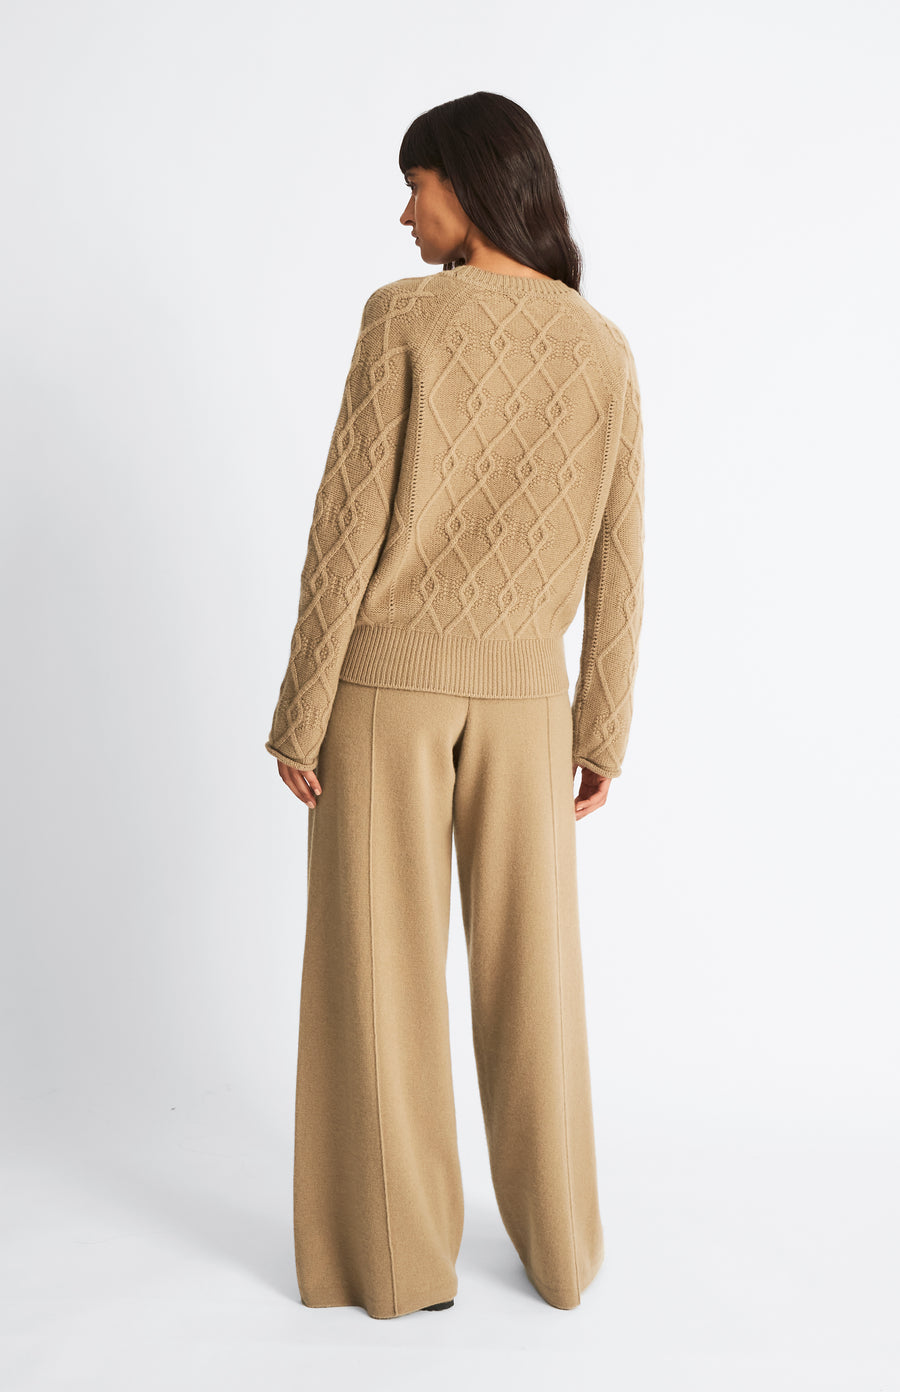 Pringle of Scotland Round Neck Multi Textured Cashmere Blend Jumper in Camel rear view.